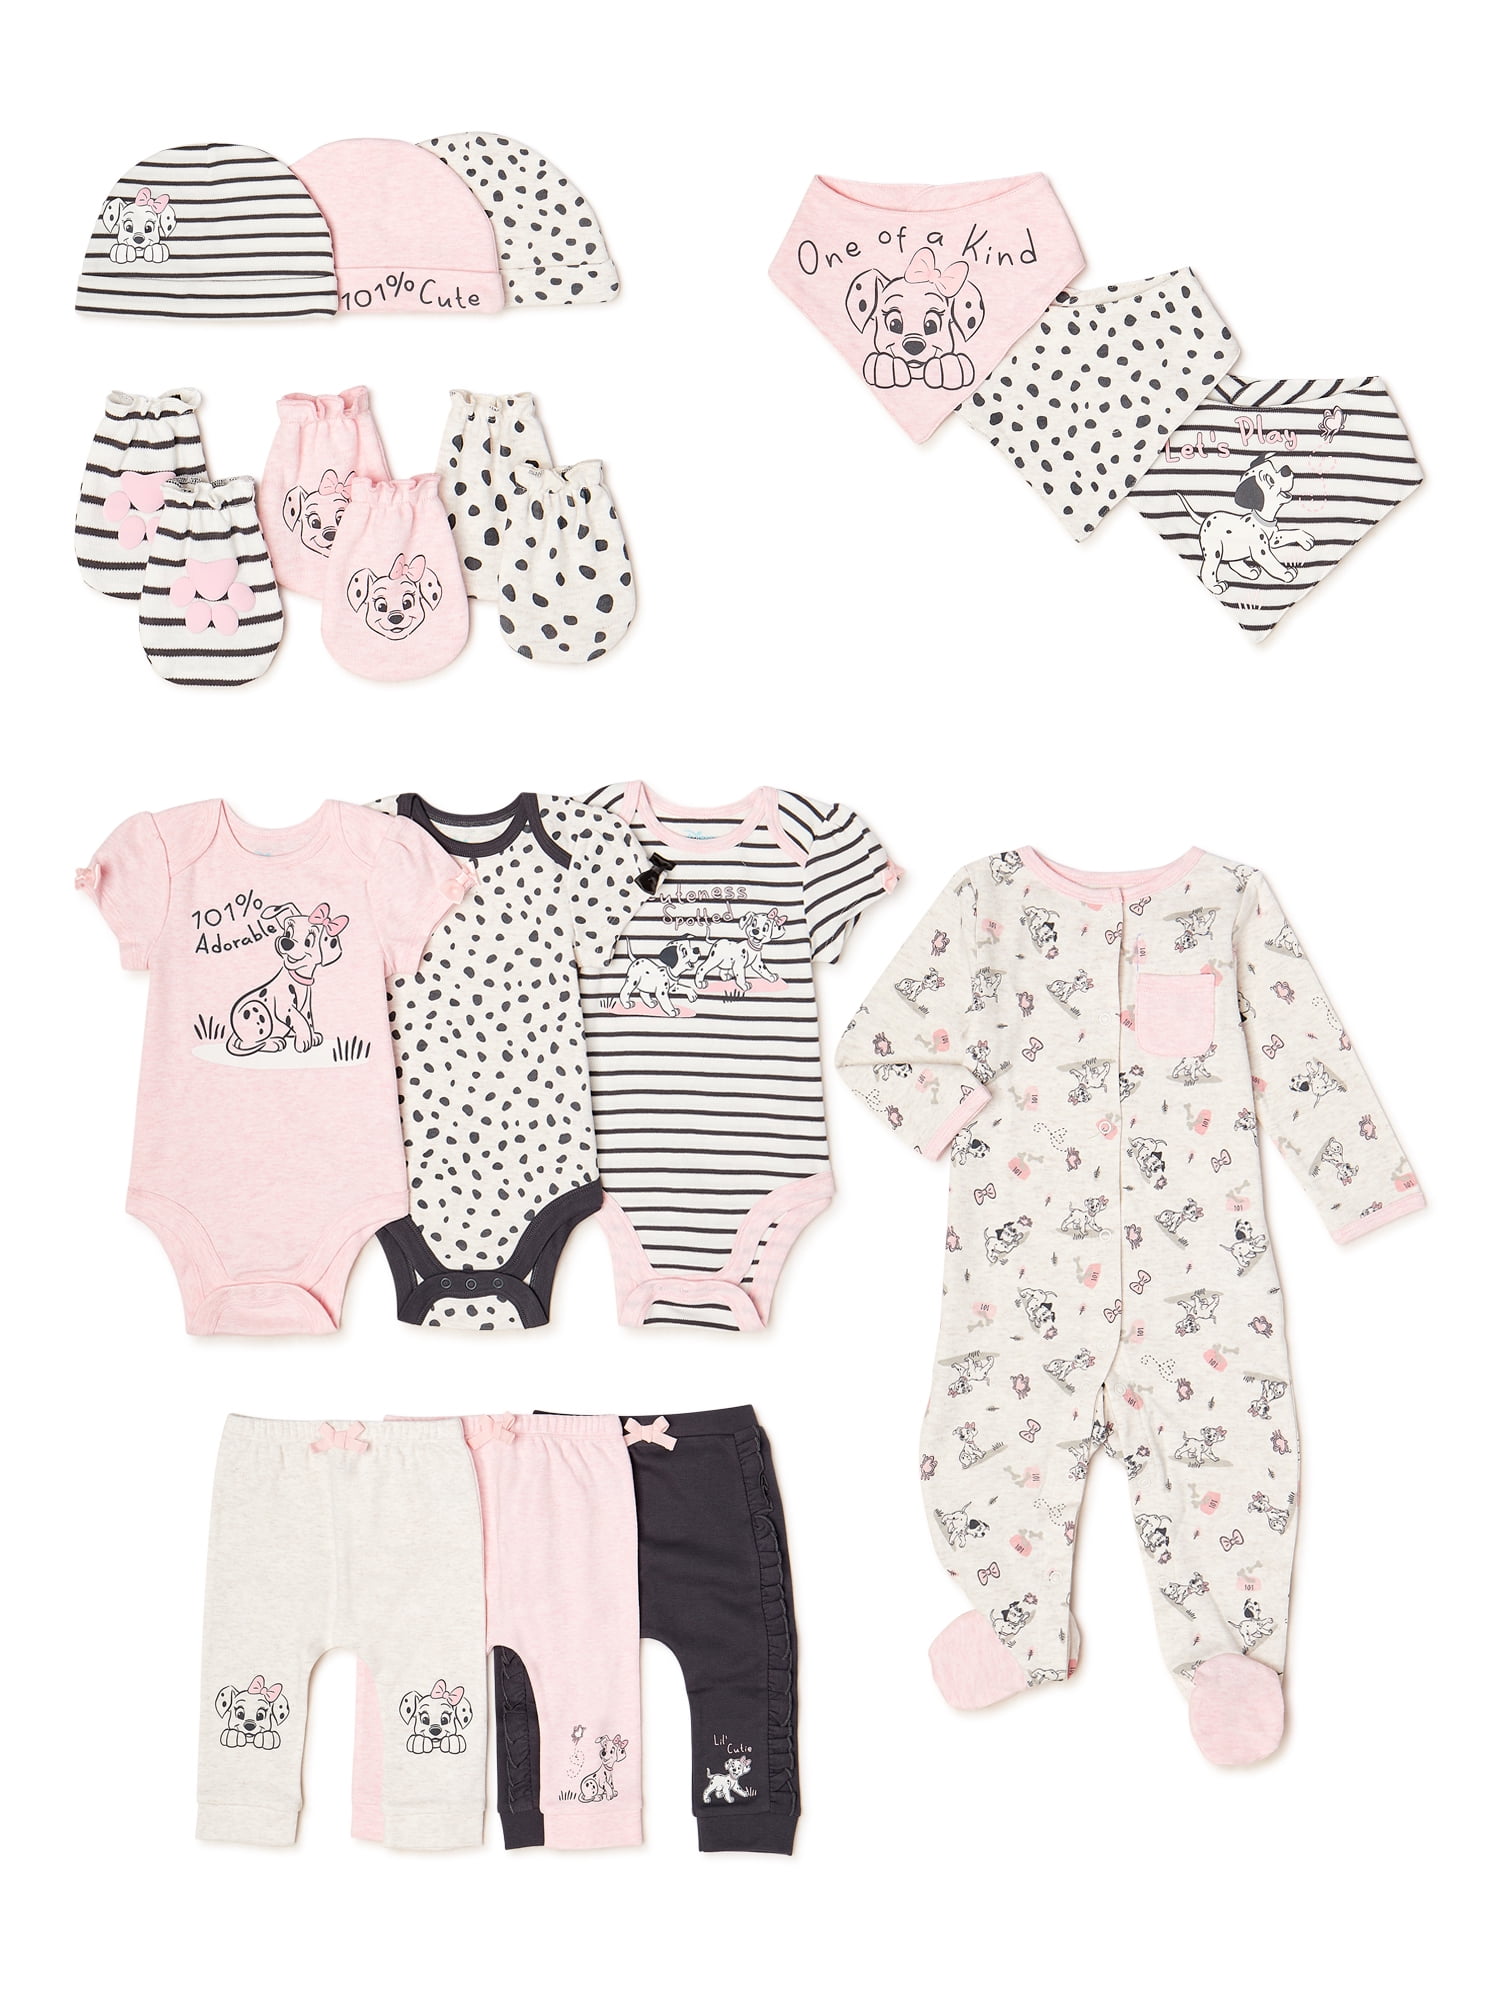 Disney Baby Wishes + Dreams Baby Girl 101 Dalmations Outfit Set, 16 ...